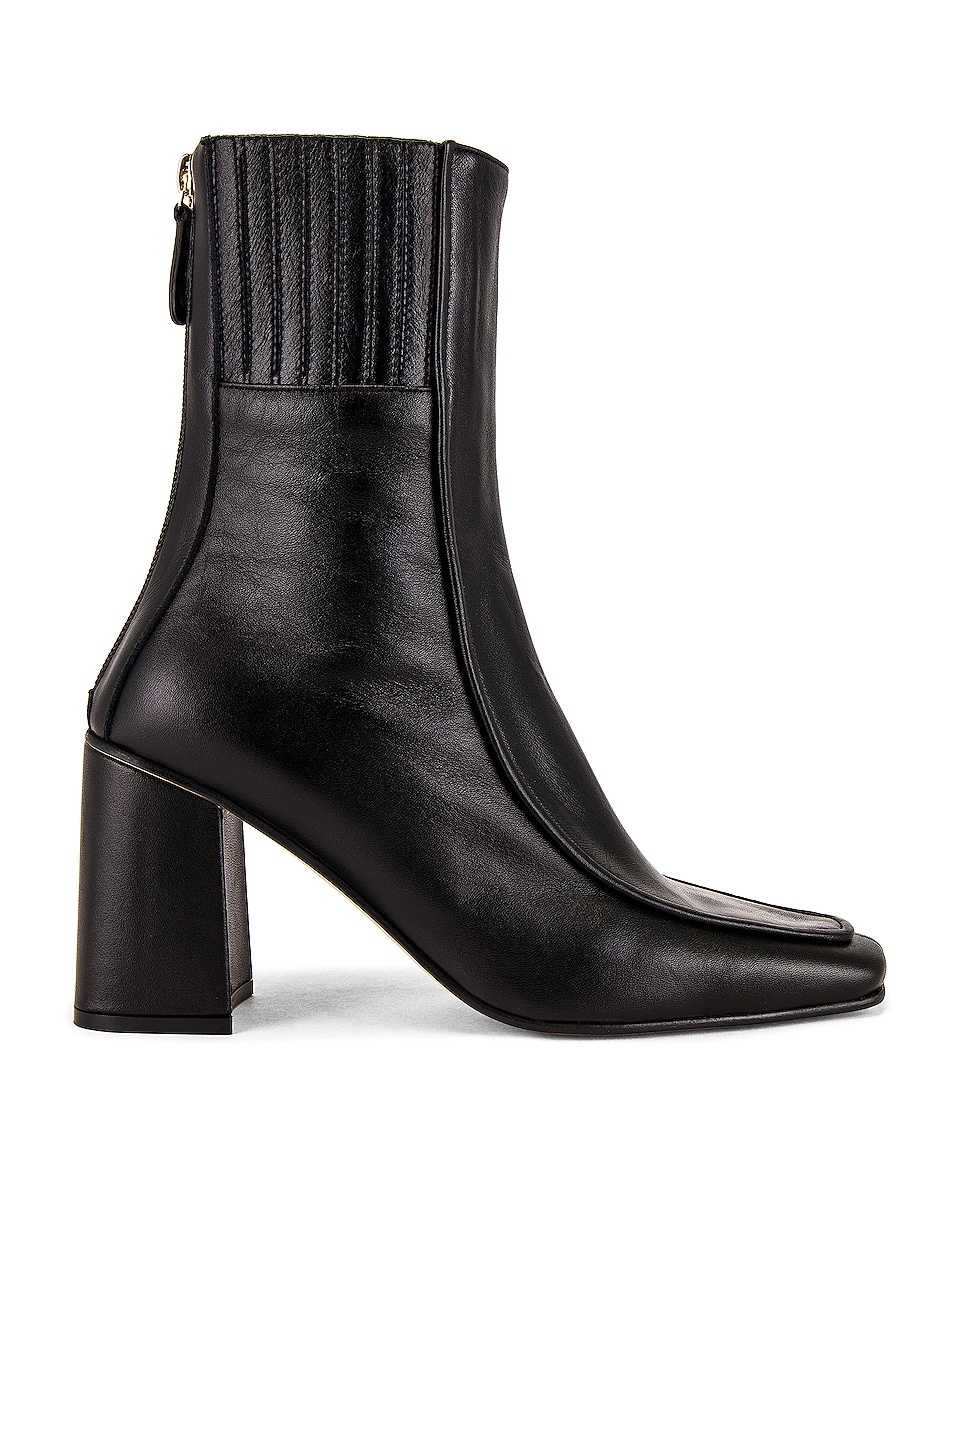 Reike Nen Piping Patterned Boots in Black | REVOLVE